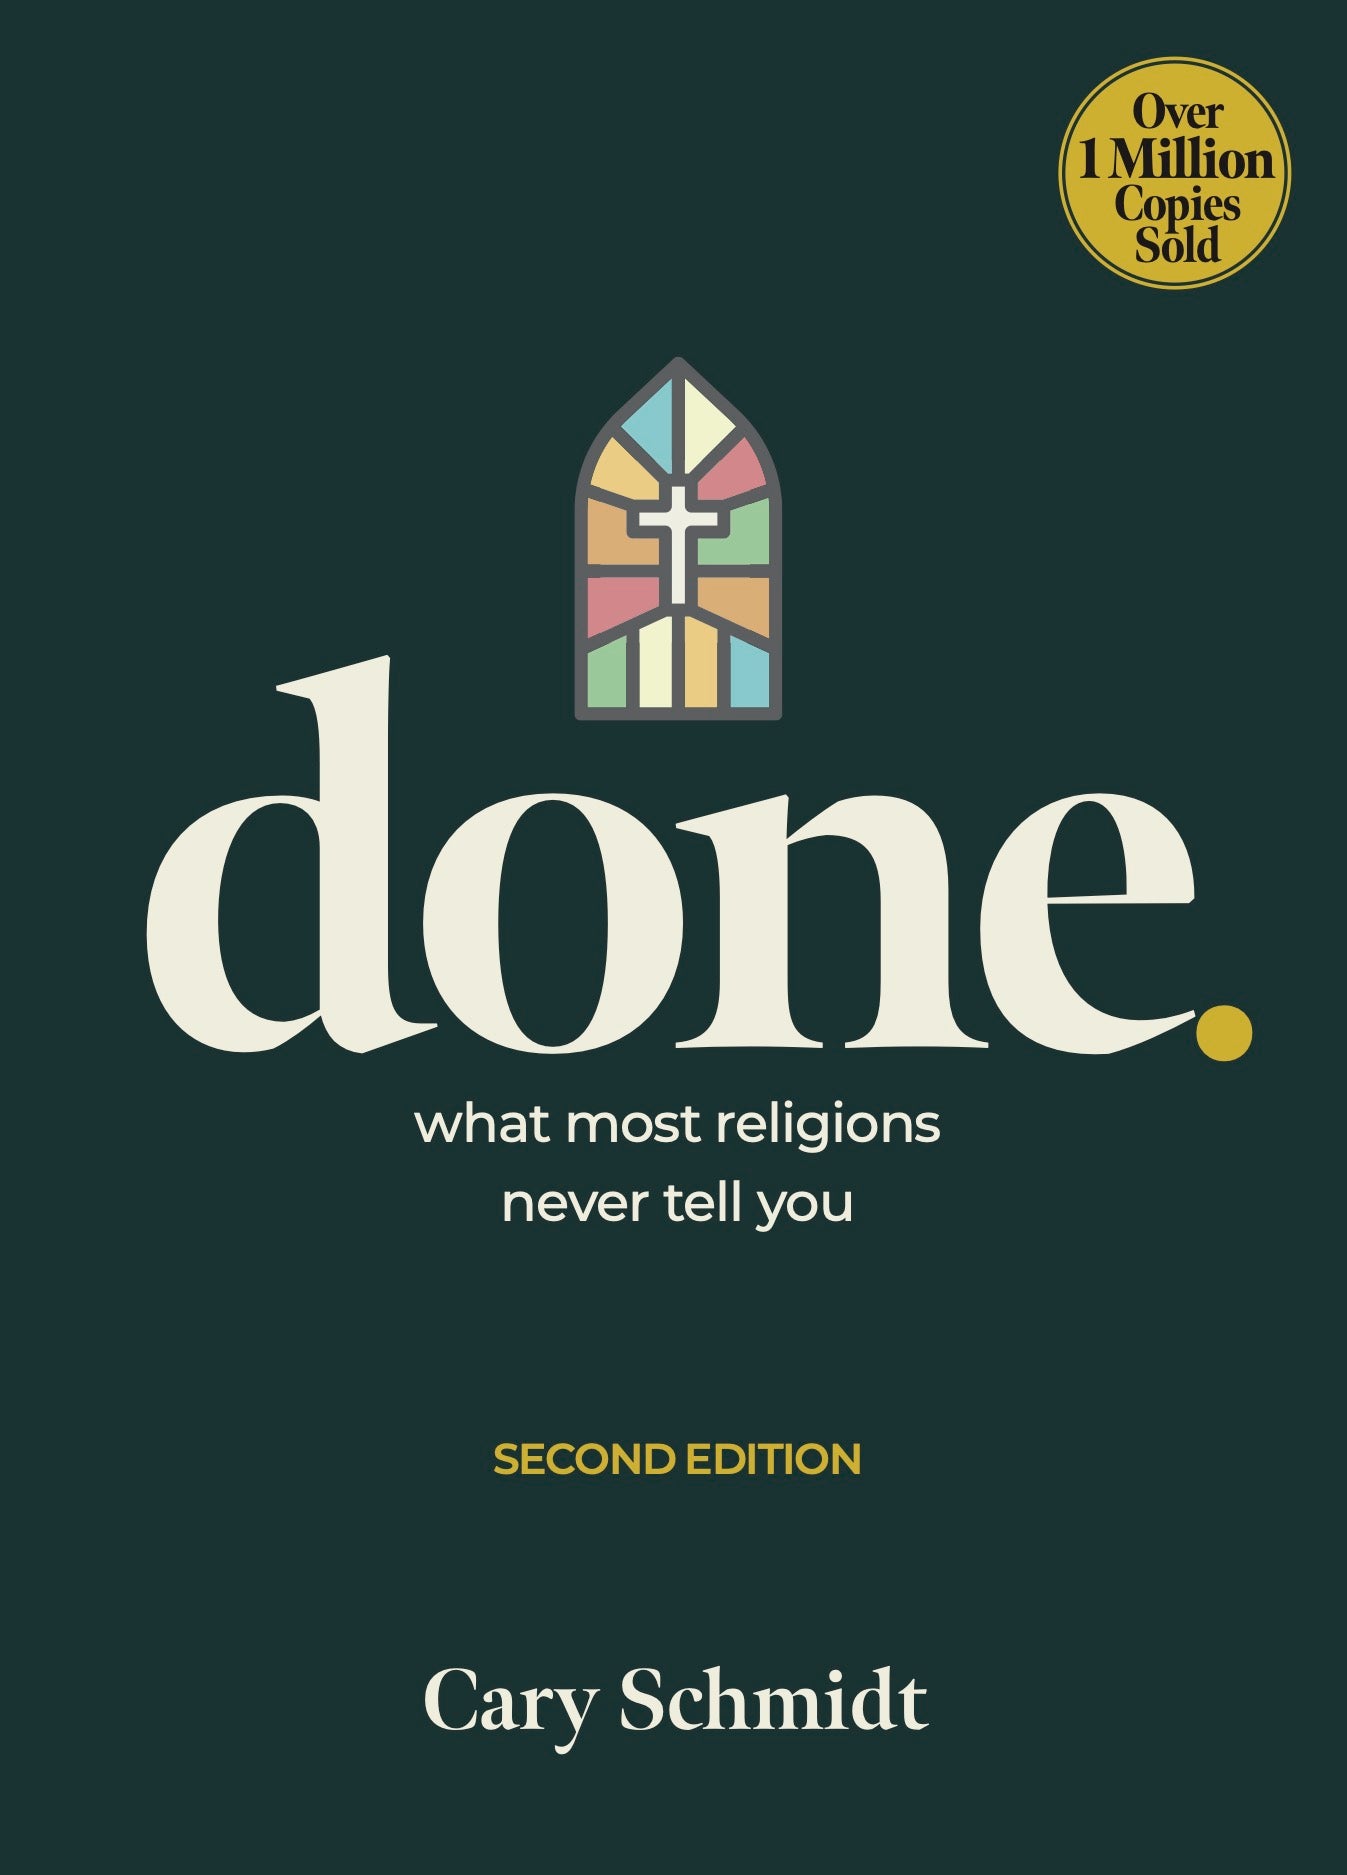 Done, Second Edition: What most religions never tell you